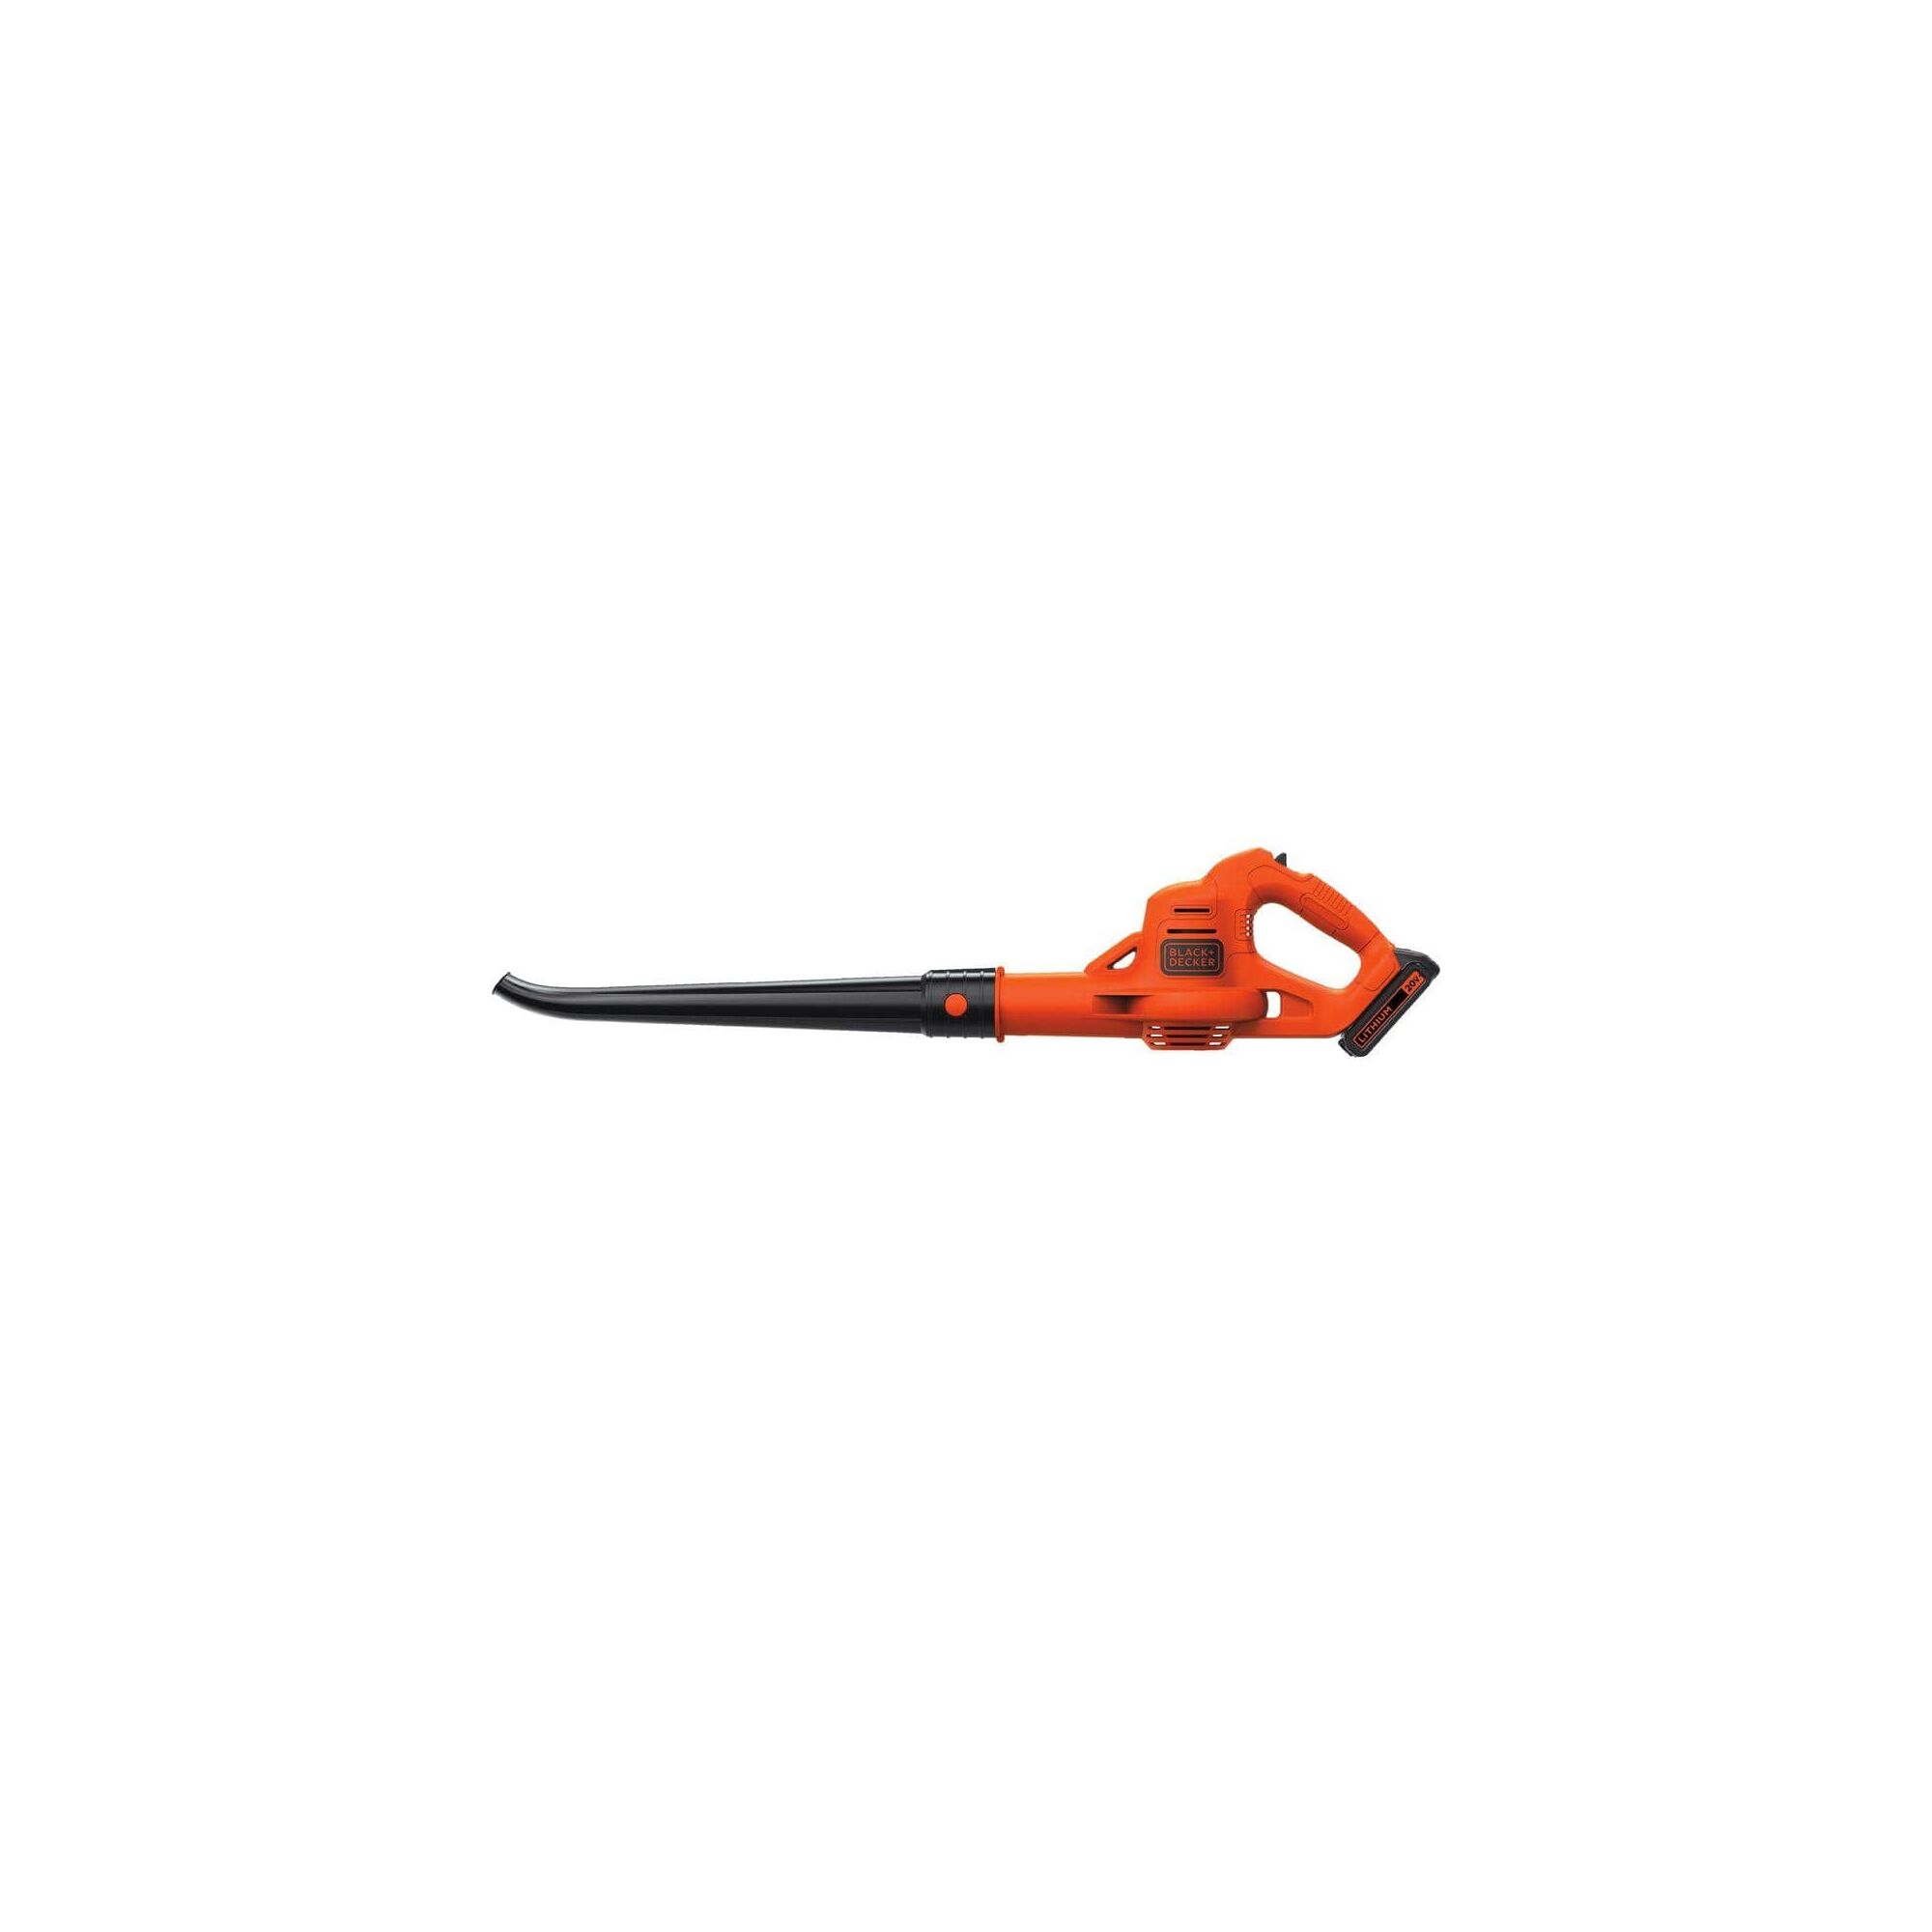 Profile of the leaf blower